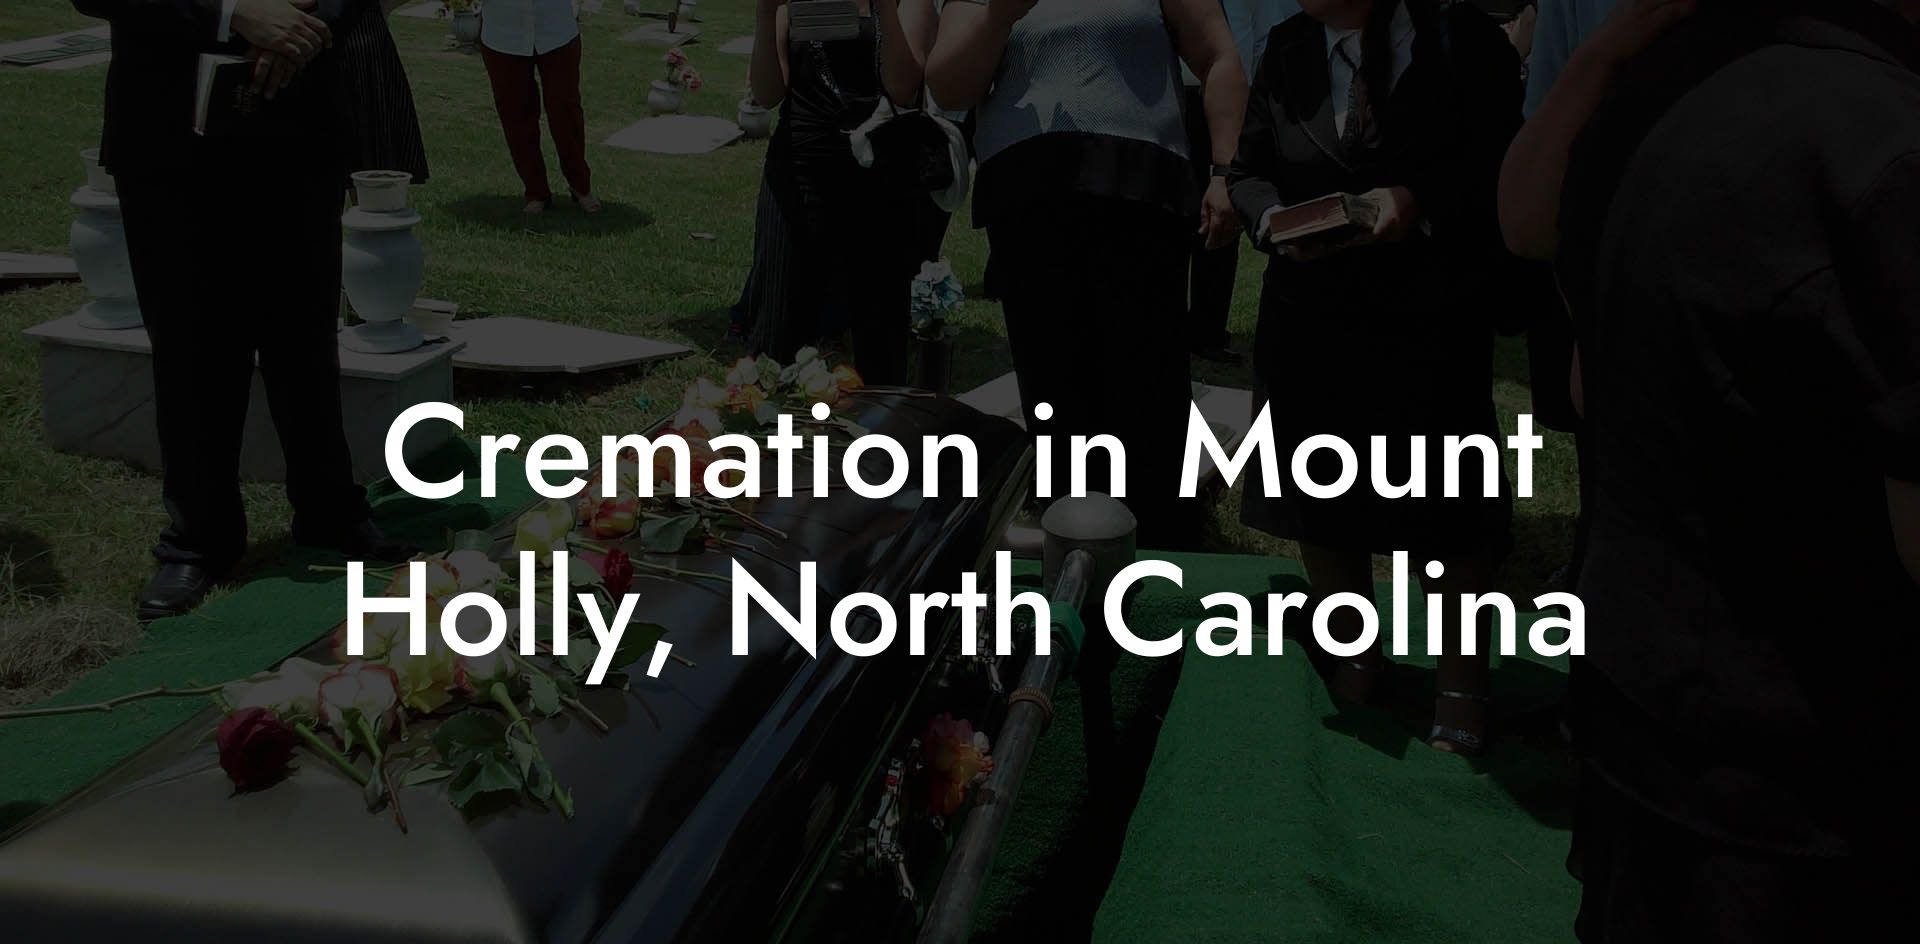 Cremation in Mount Holly, North Carolina